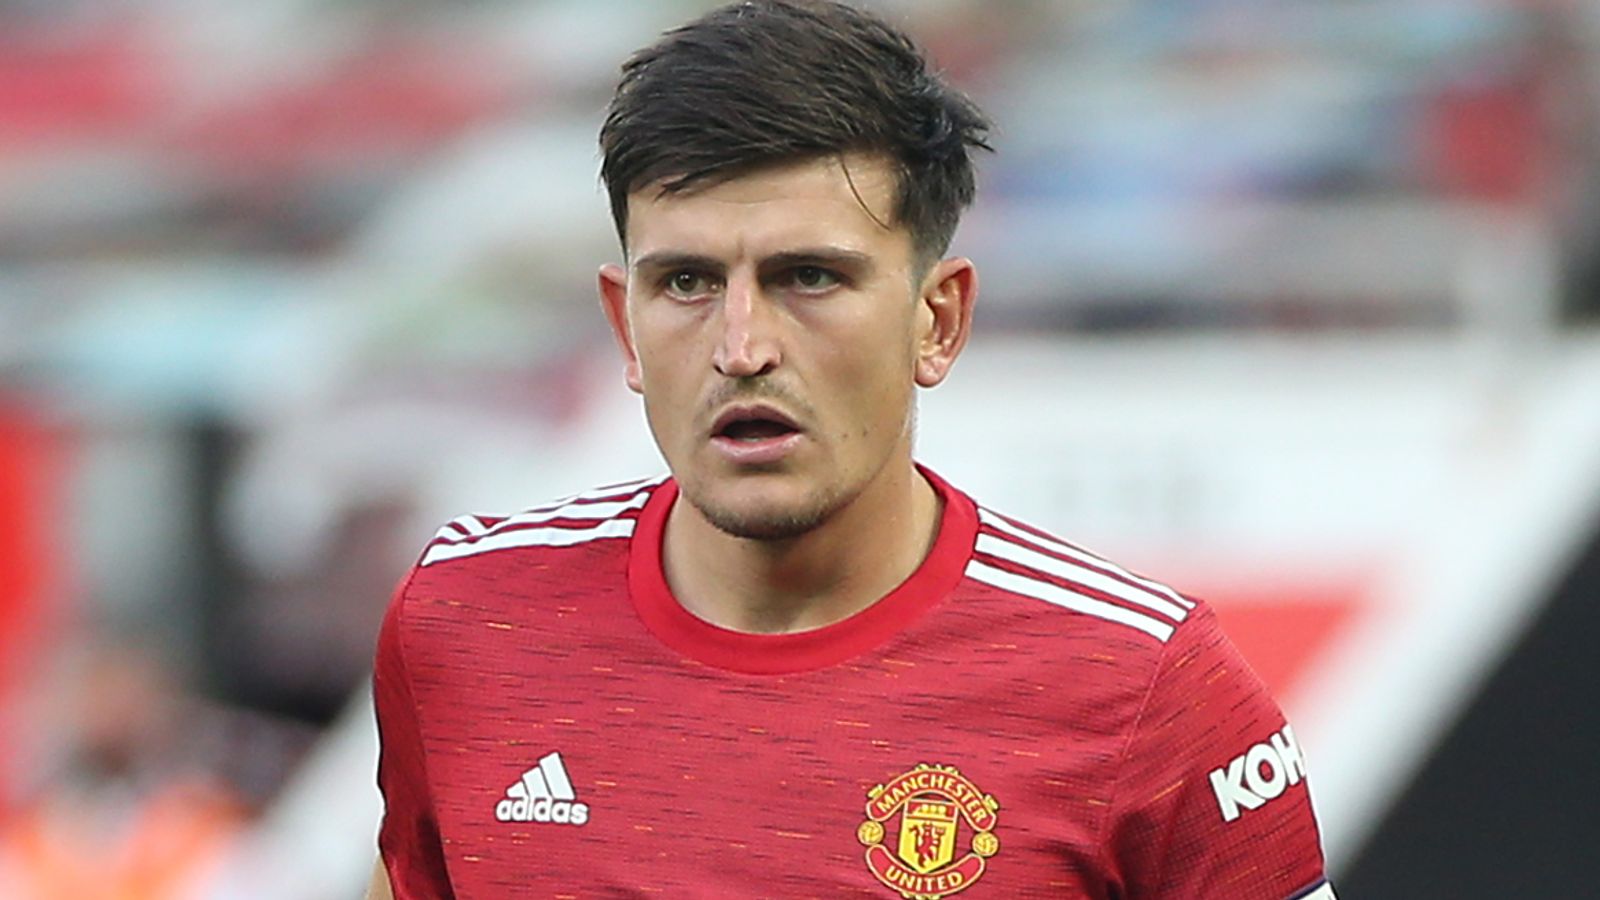 Harry Maguire: Manchester United defender says he looks out for team